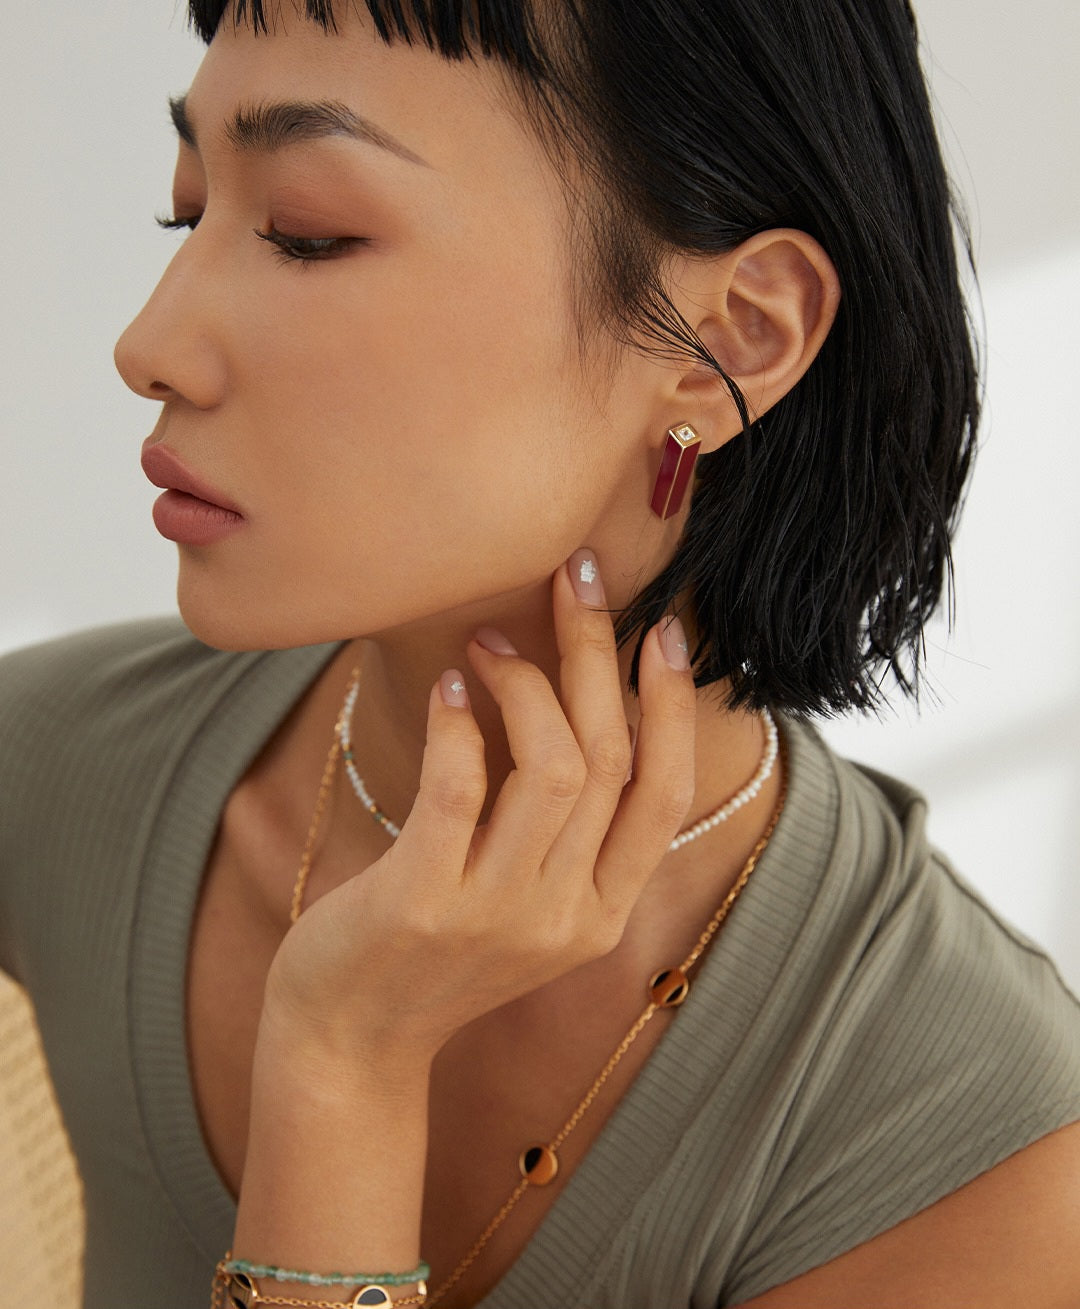 an asian model wearing a Minimalist gold earrings with red drip glaze detail on her ear